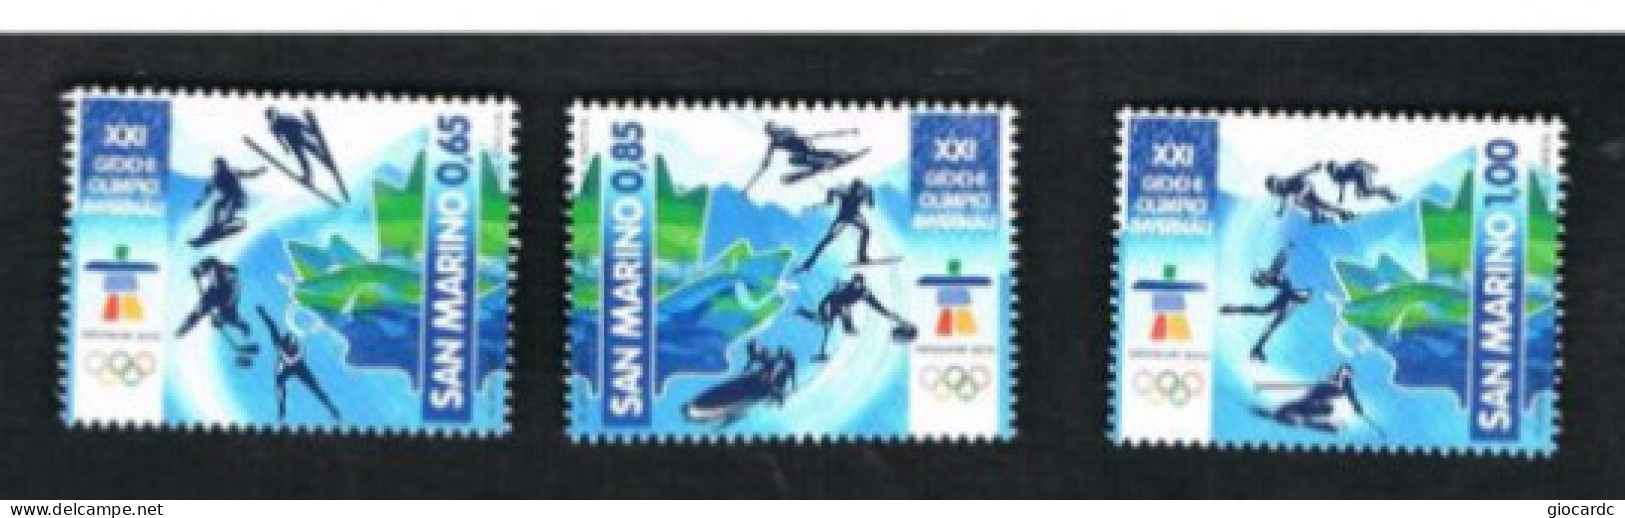 SAN MARINO - UN 2273.2275 -  2010 XXI OLIMPIADI INVERNALI A VANCOUVER (COMPLET SET OF 3 STAMPS, BY BF) - MINT** - Ungebraucht